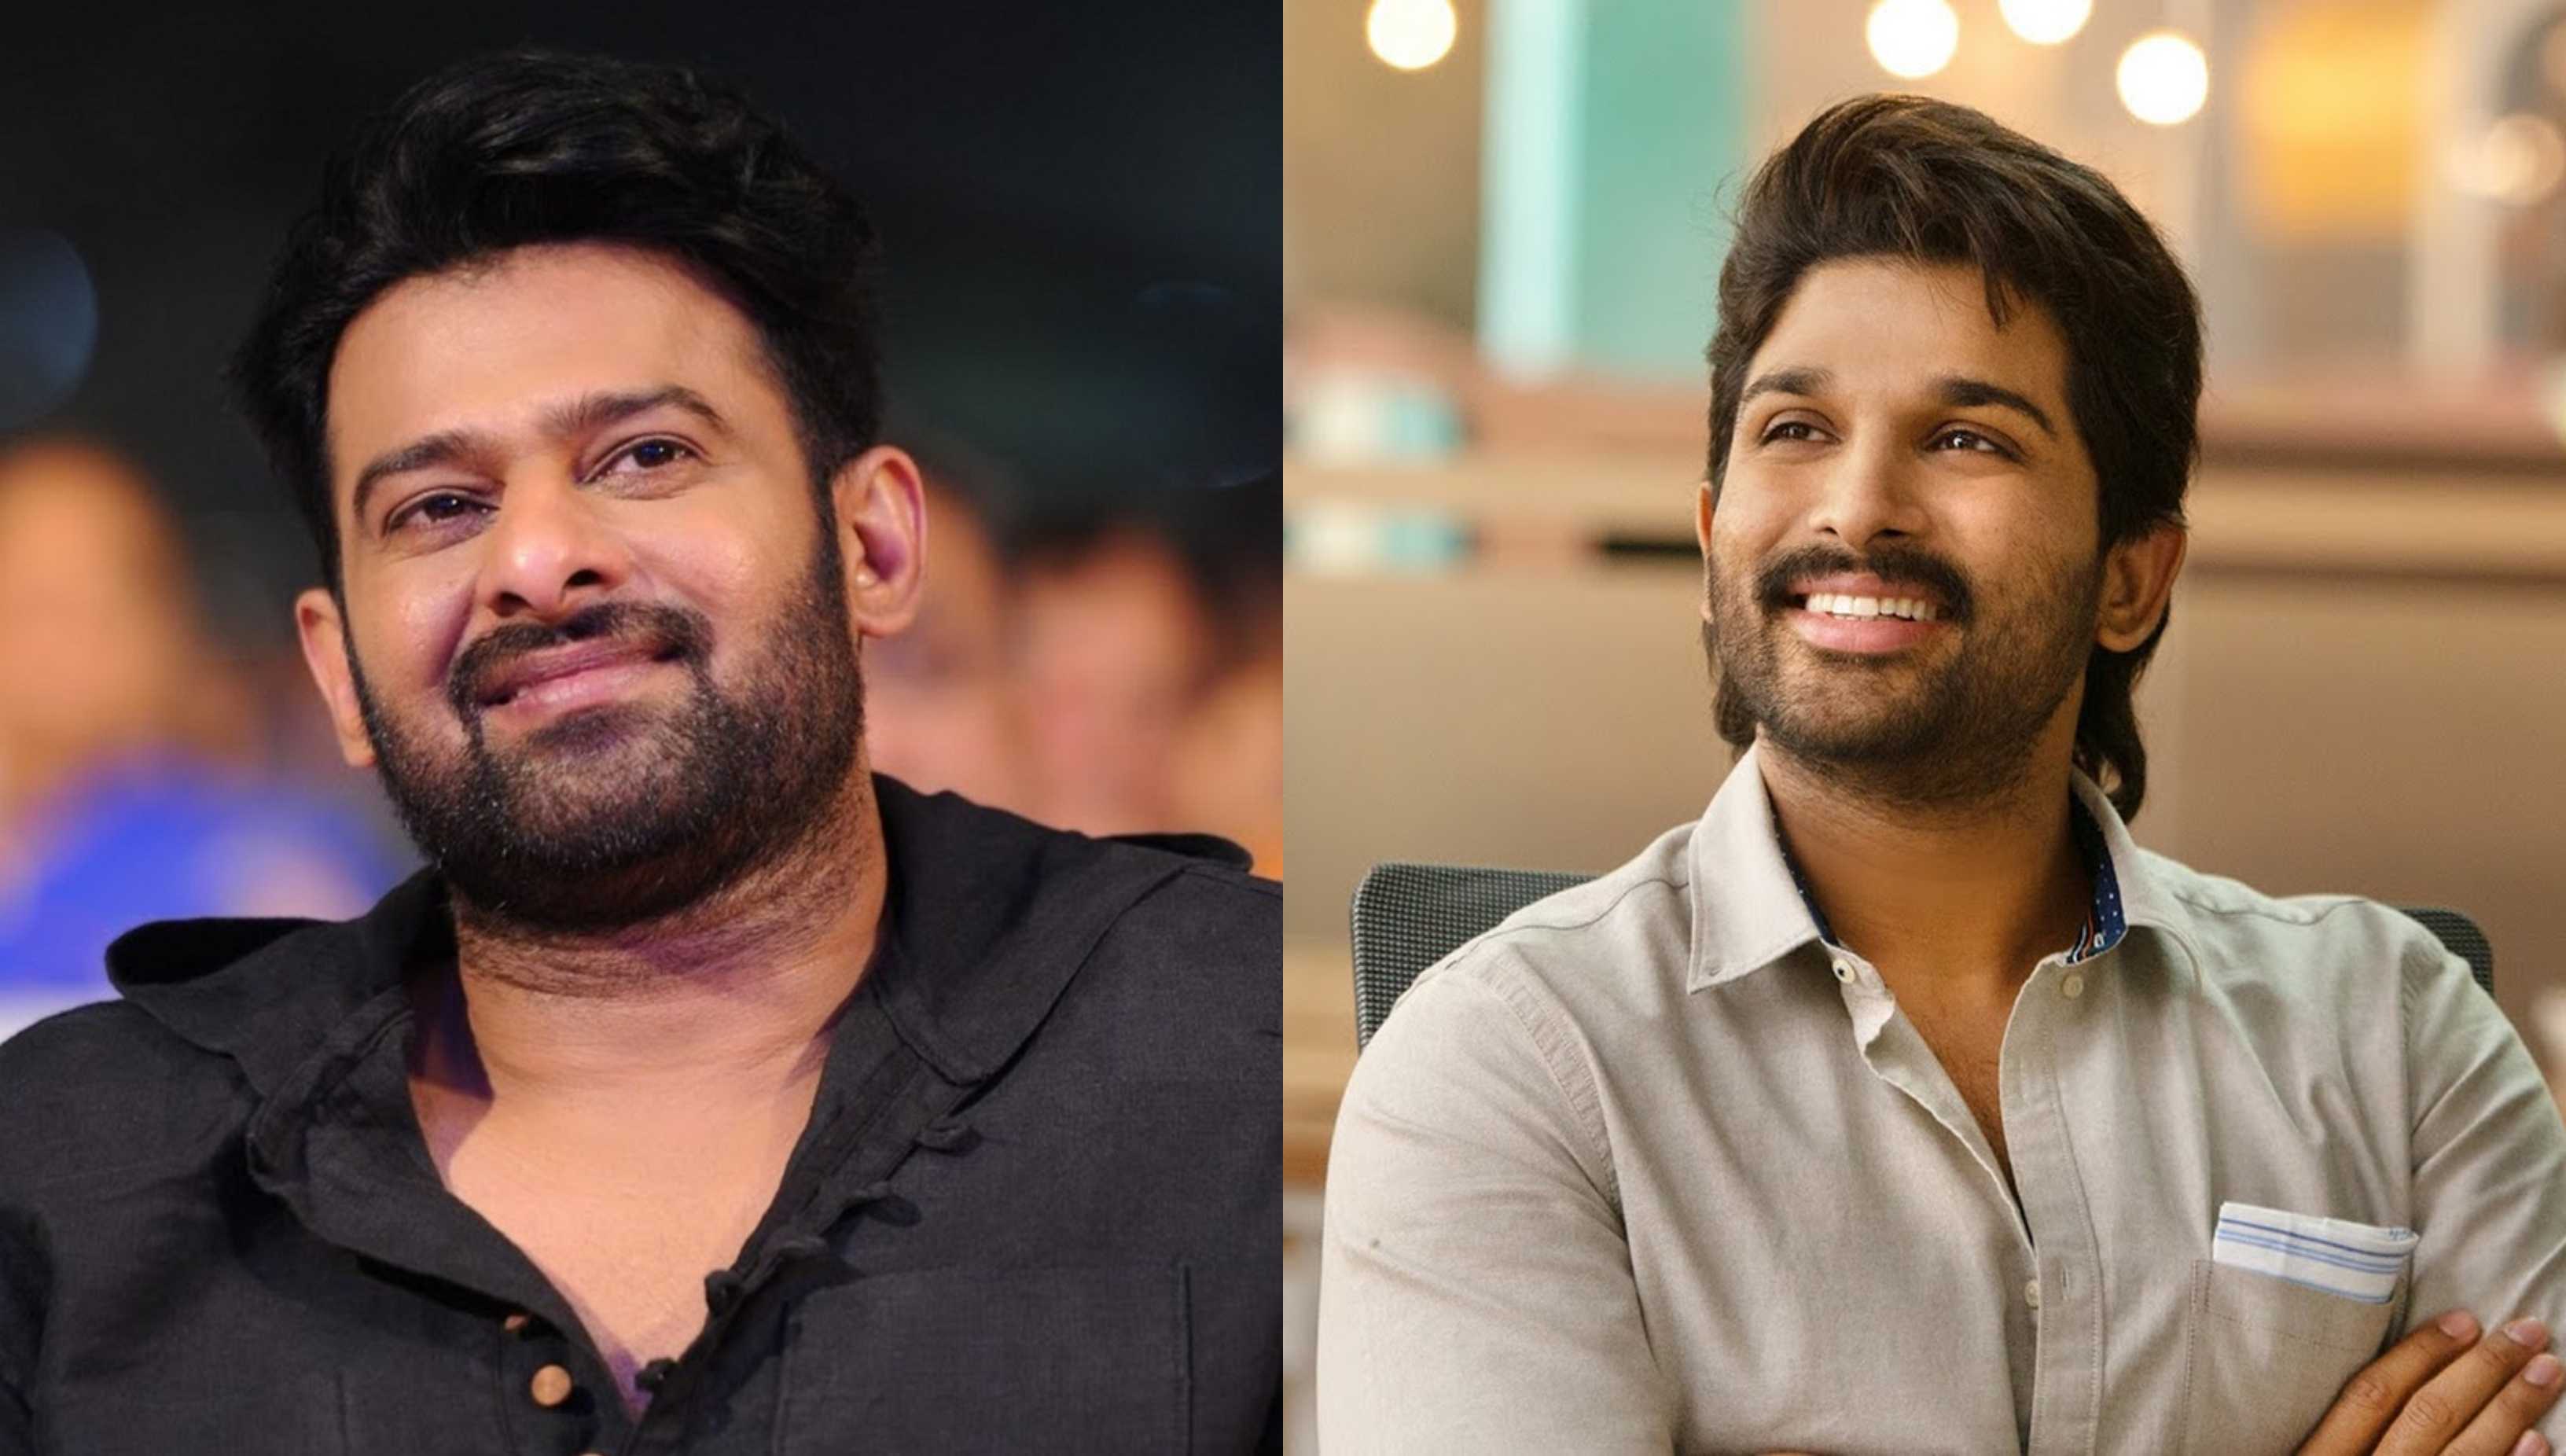 From Prabhas to Allu Arjun, 5 South superstars who are charging more than Rs 100 crore for films